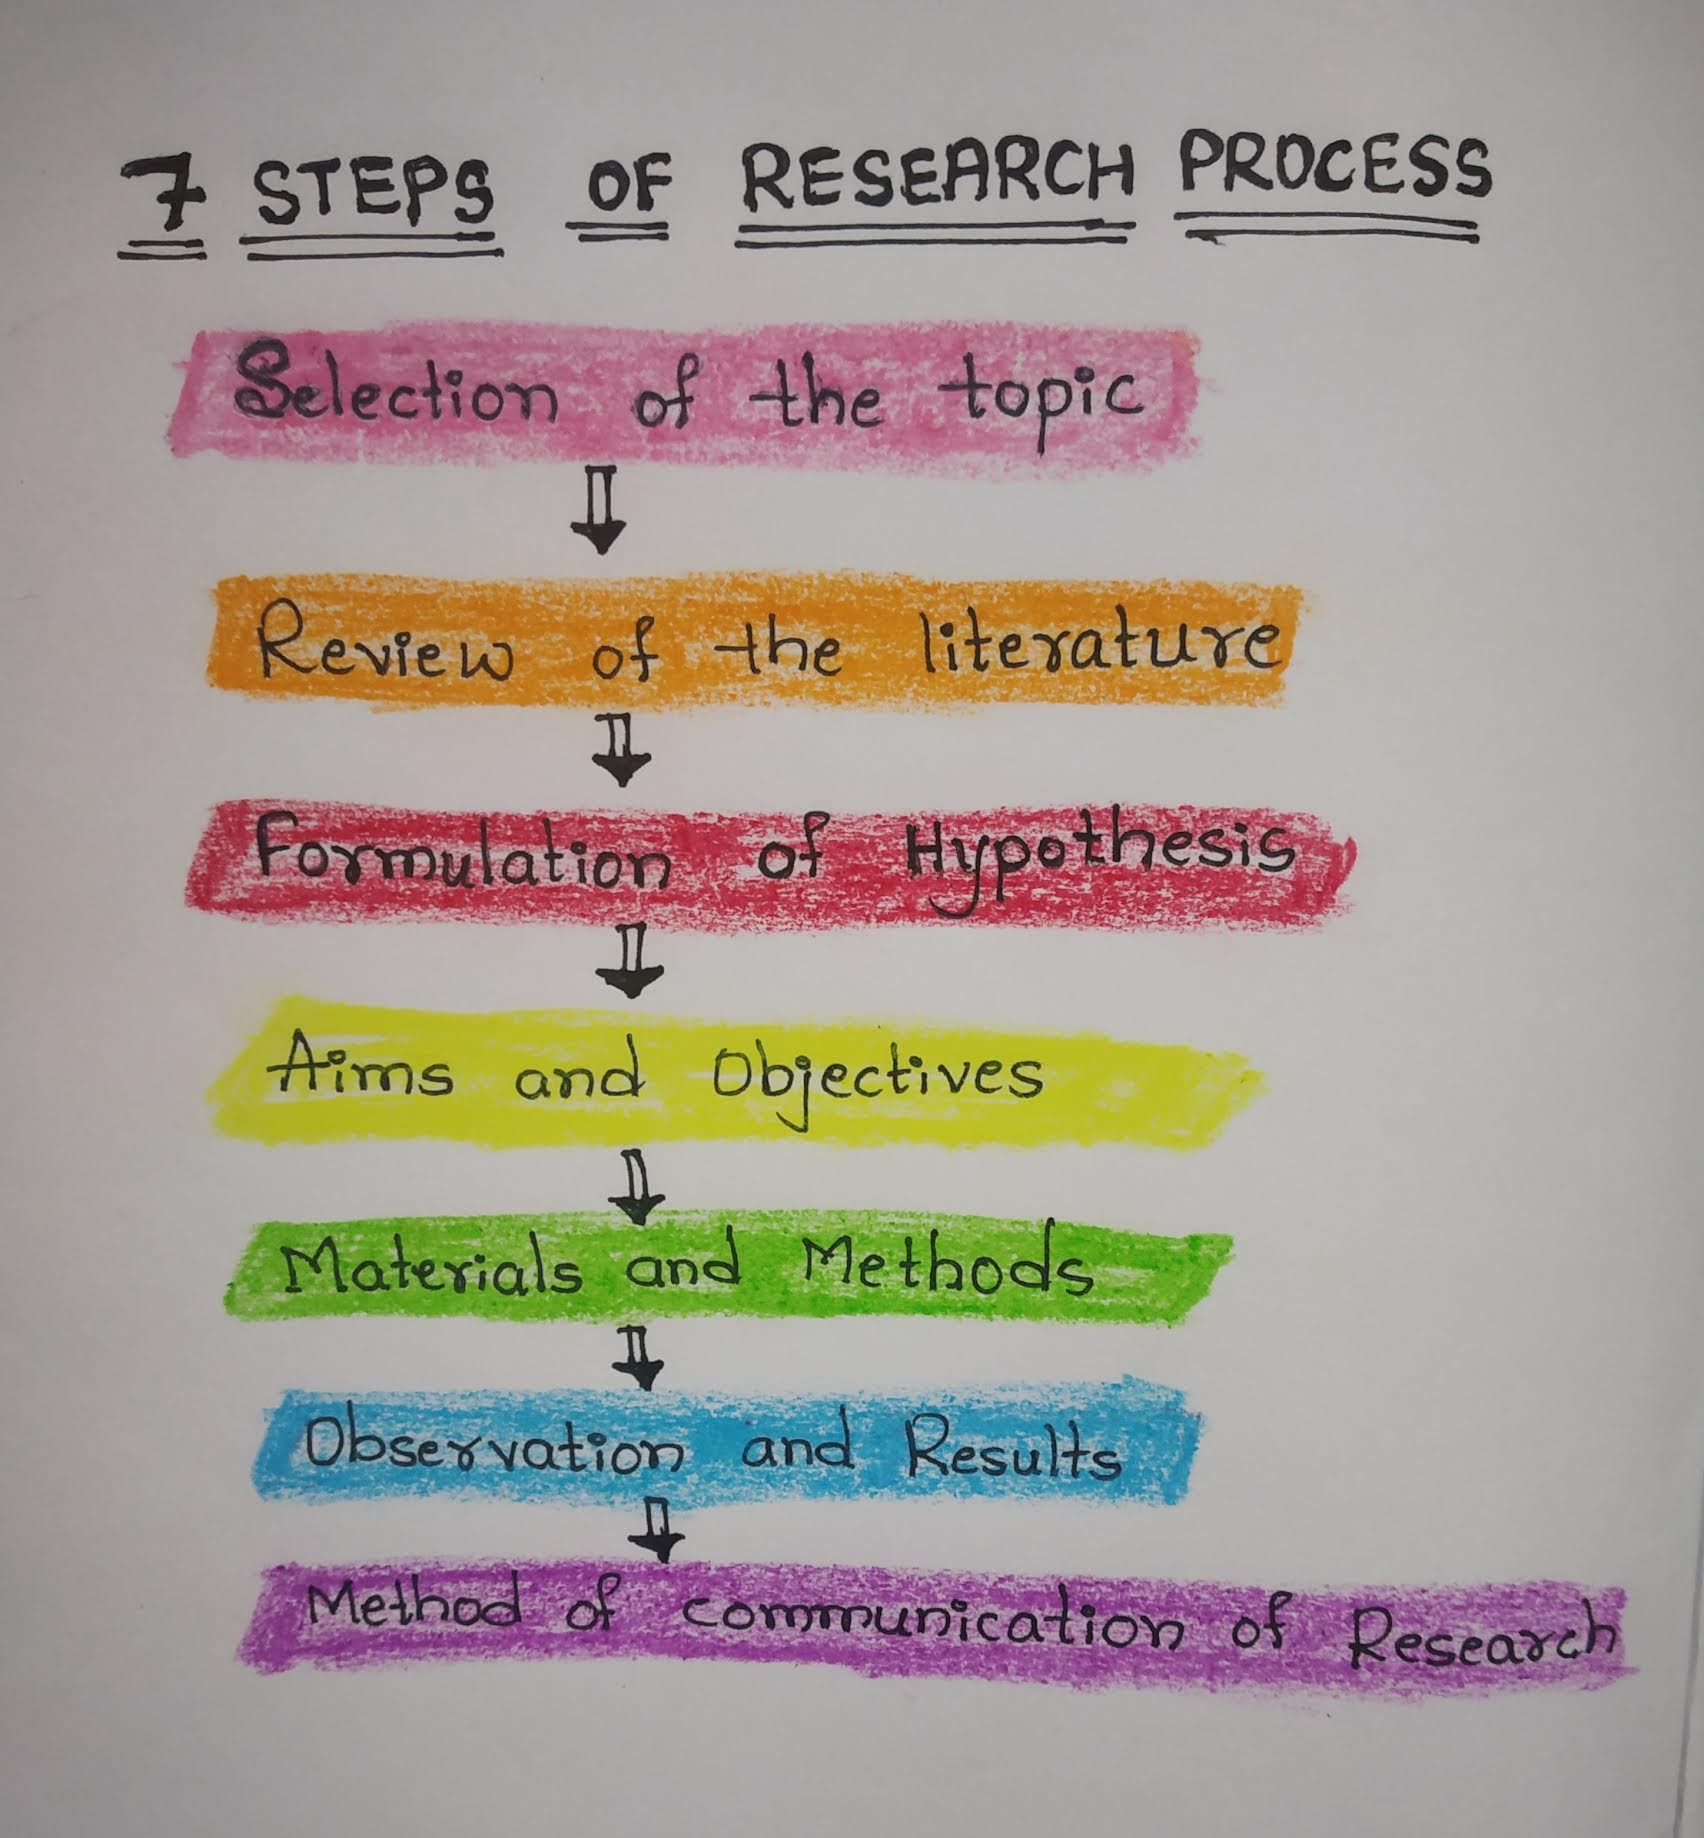 7 Steps Of Research Process - Research And Stat - Notes - Teachmint